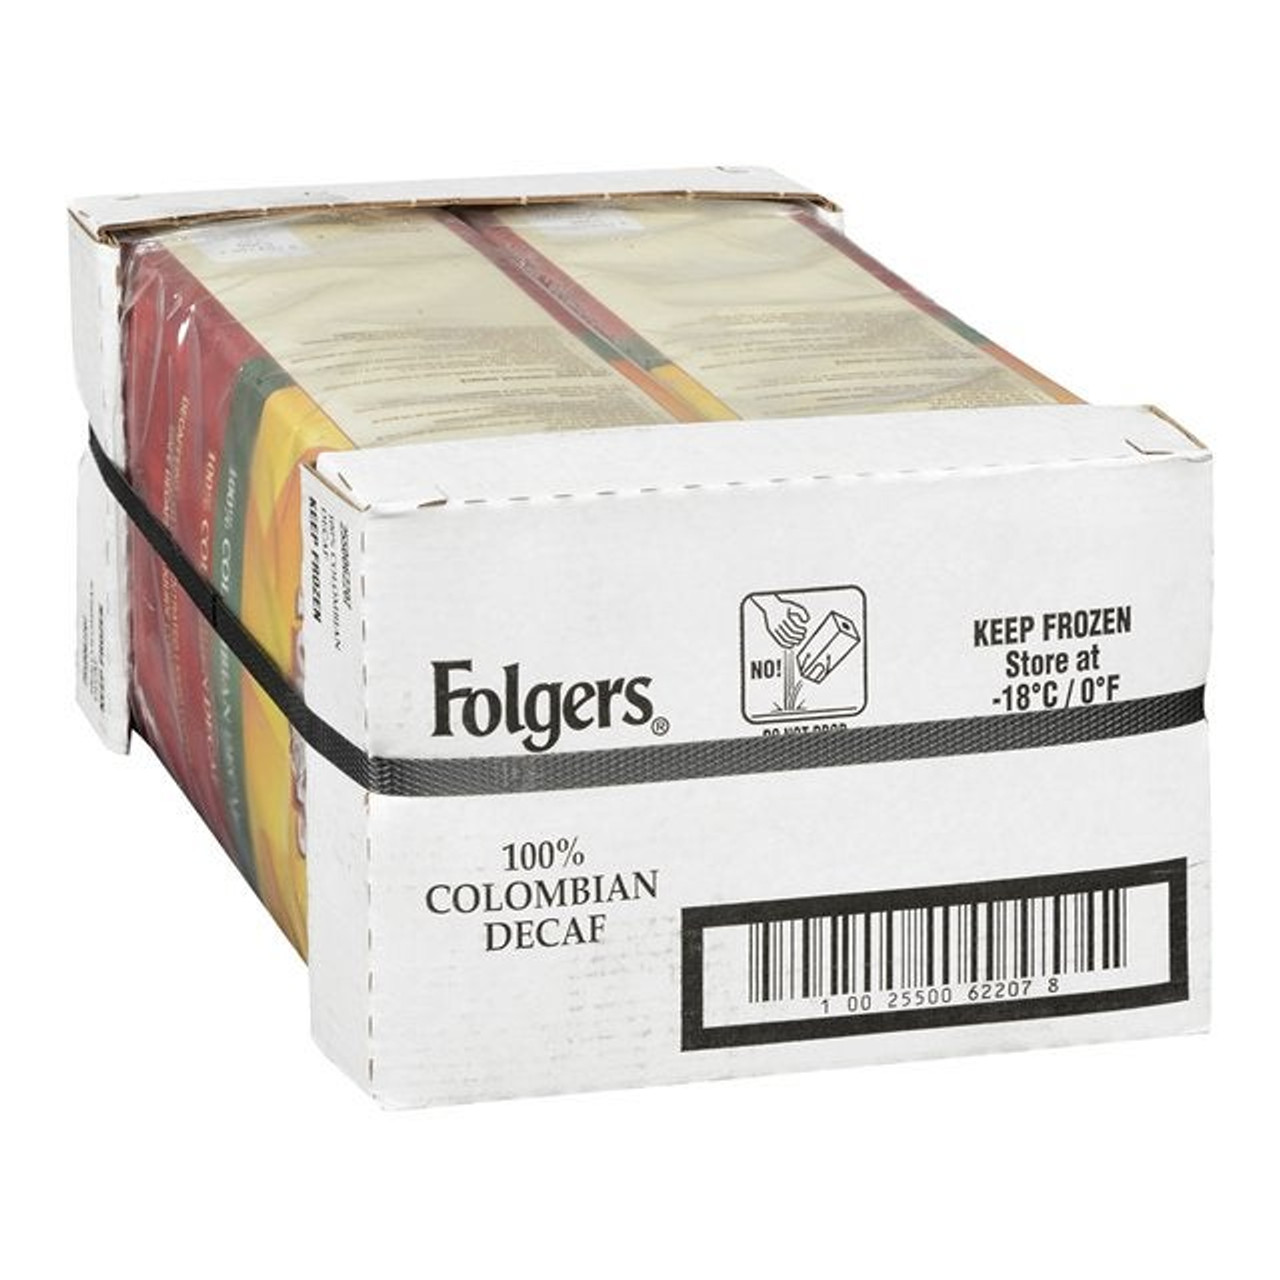 Folgers Colombian Decafinated Coffee